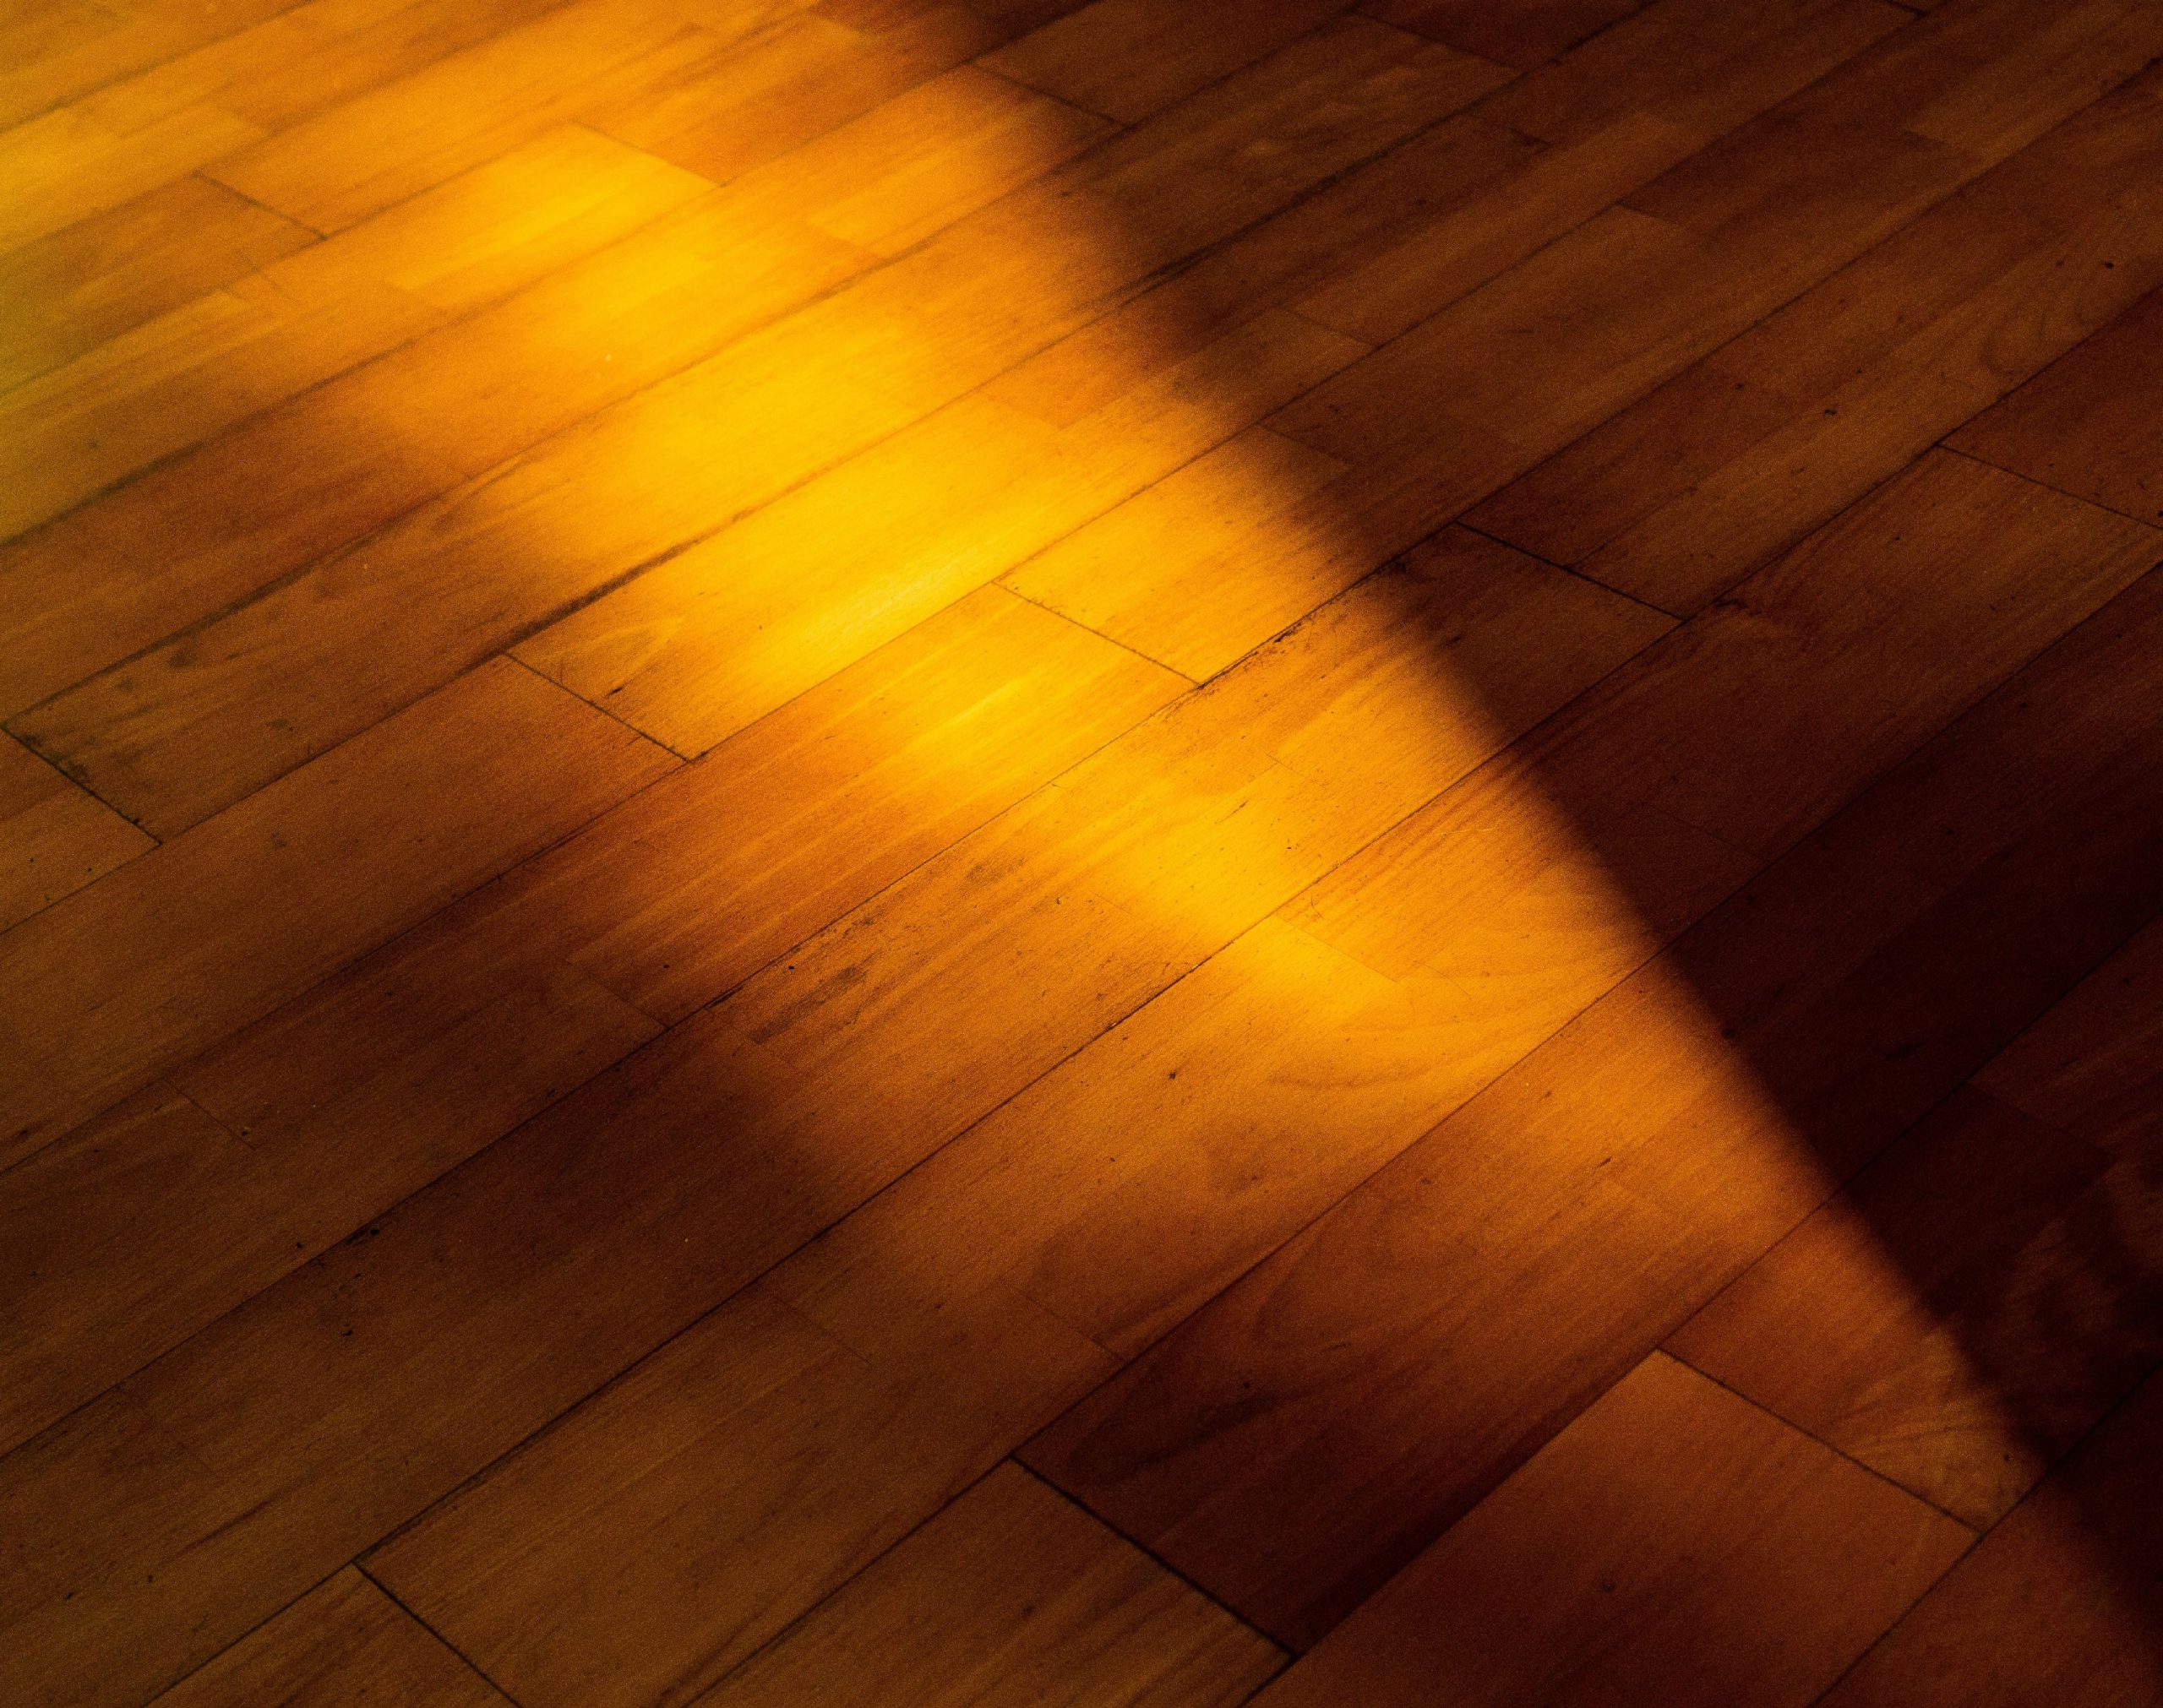 Everything You Need To Know About Non-Toxic Wood Floor Sealers and Finishes